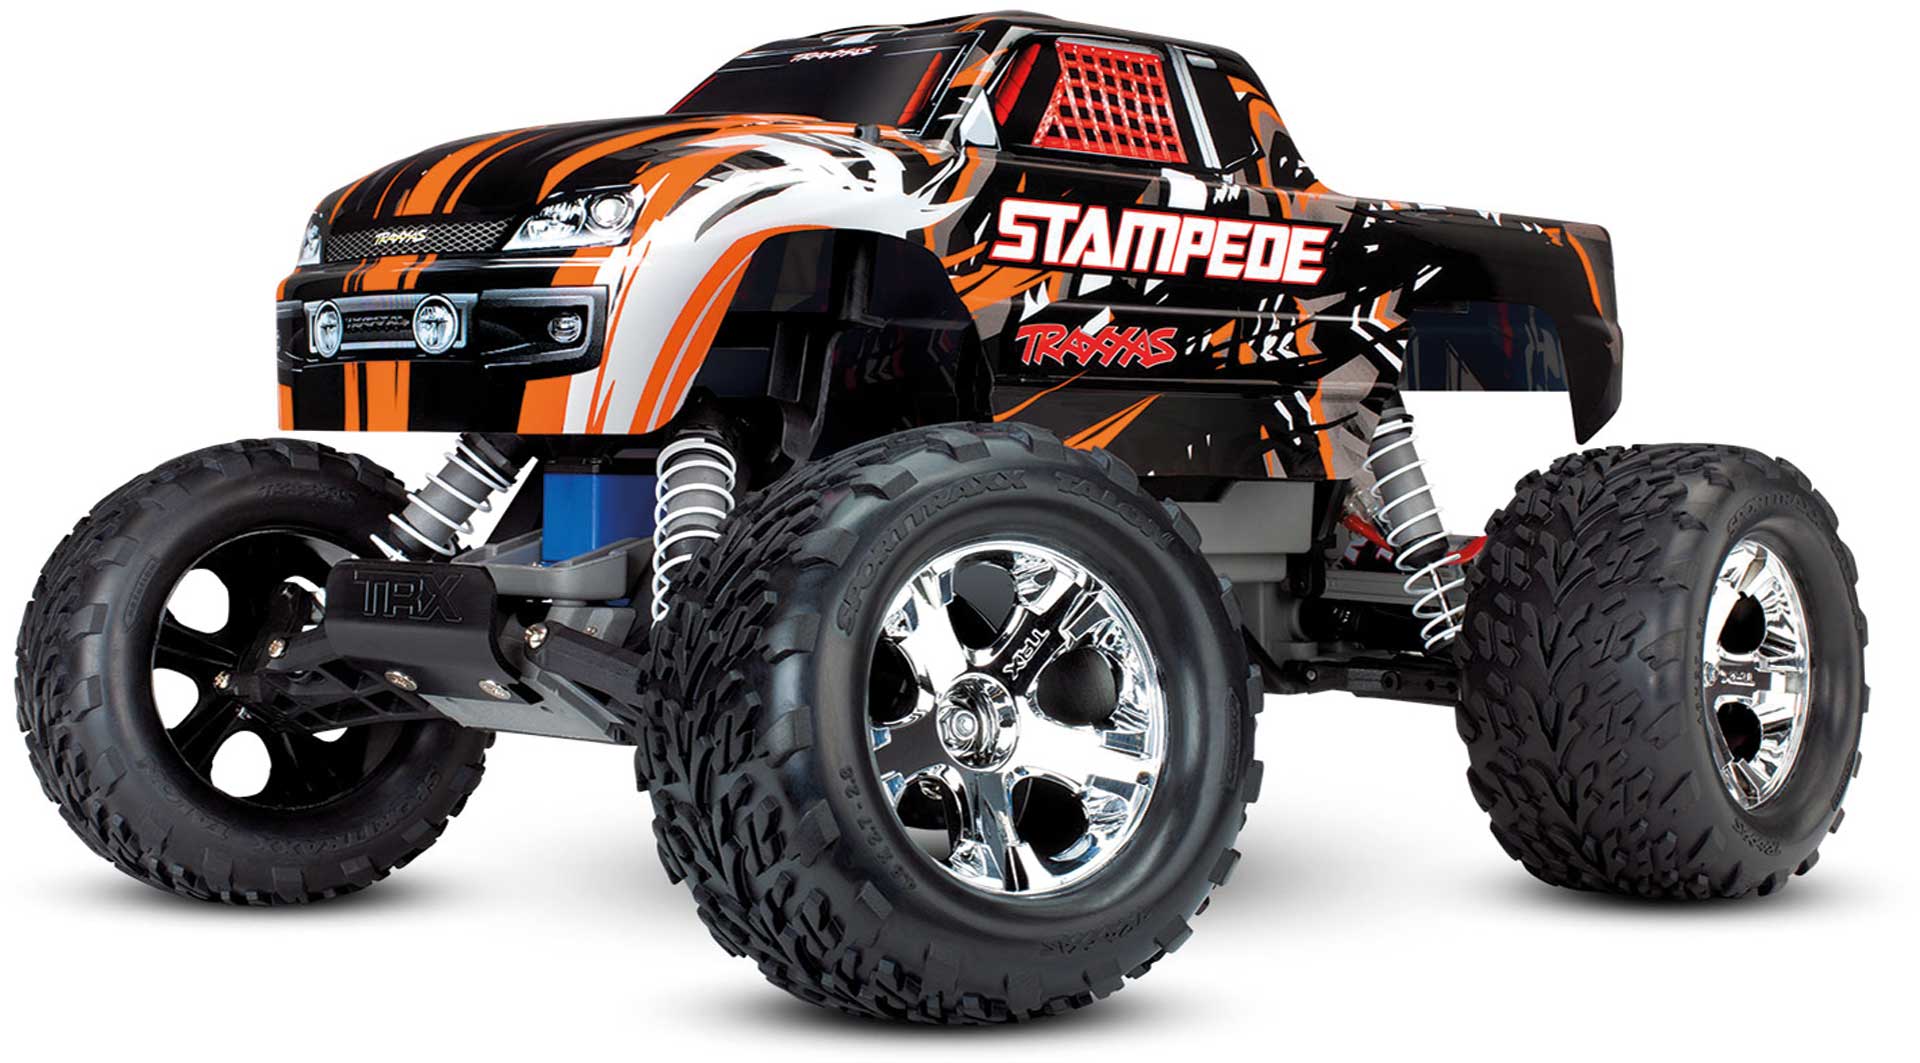 TRAXXAS Stampede orange RTR sans accu/chargeur 1/10 2WD MONSTER TRUCK BRUSHED